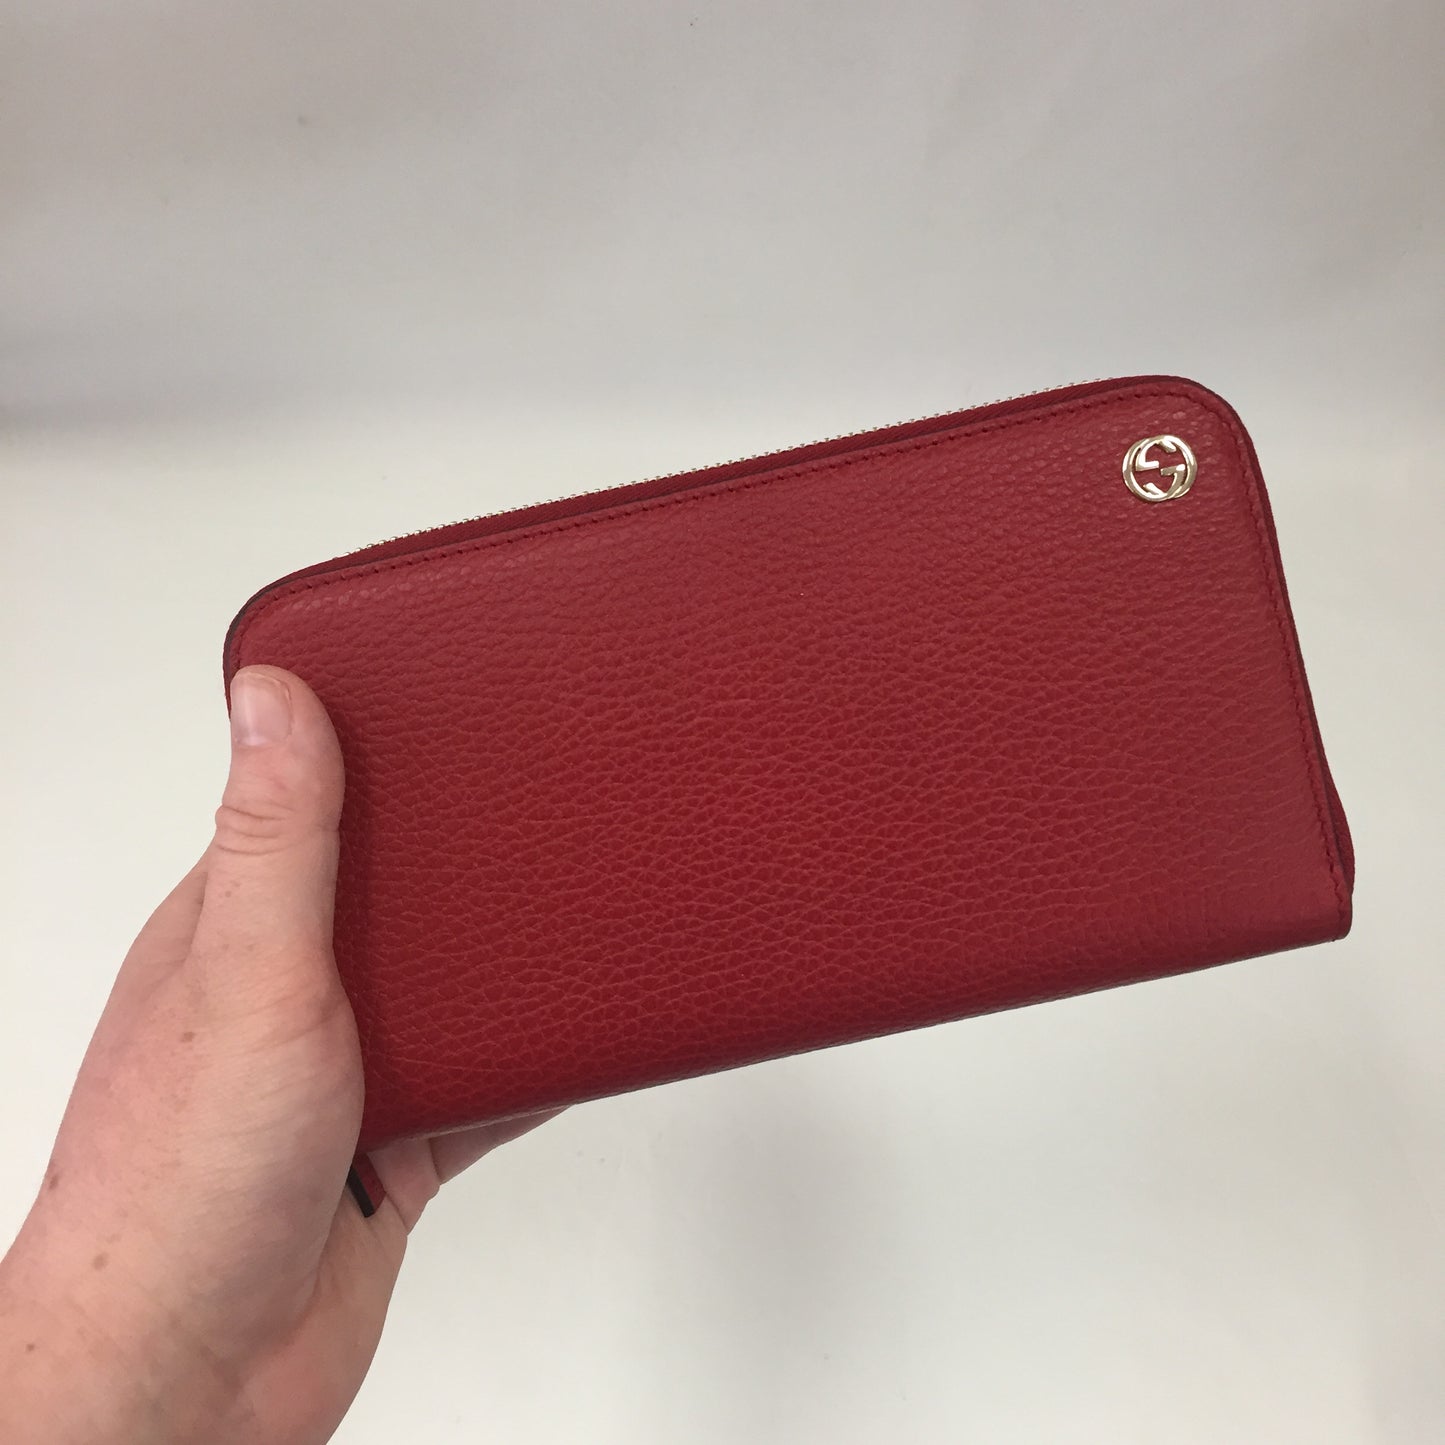 Authentic Gucci Red Soho Zip Wallet